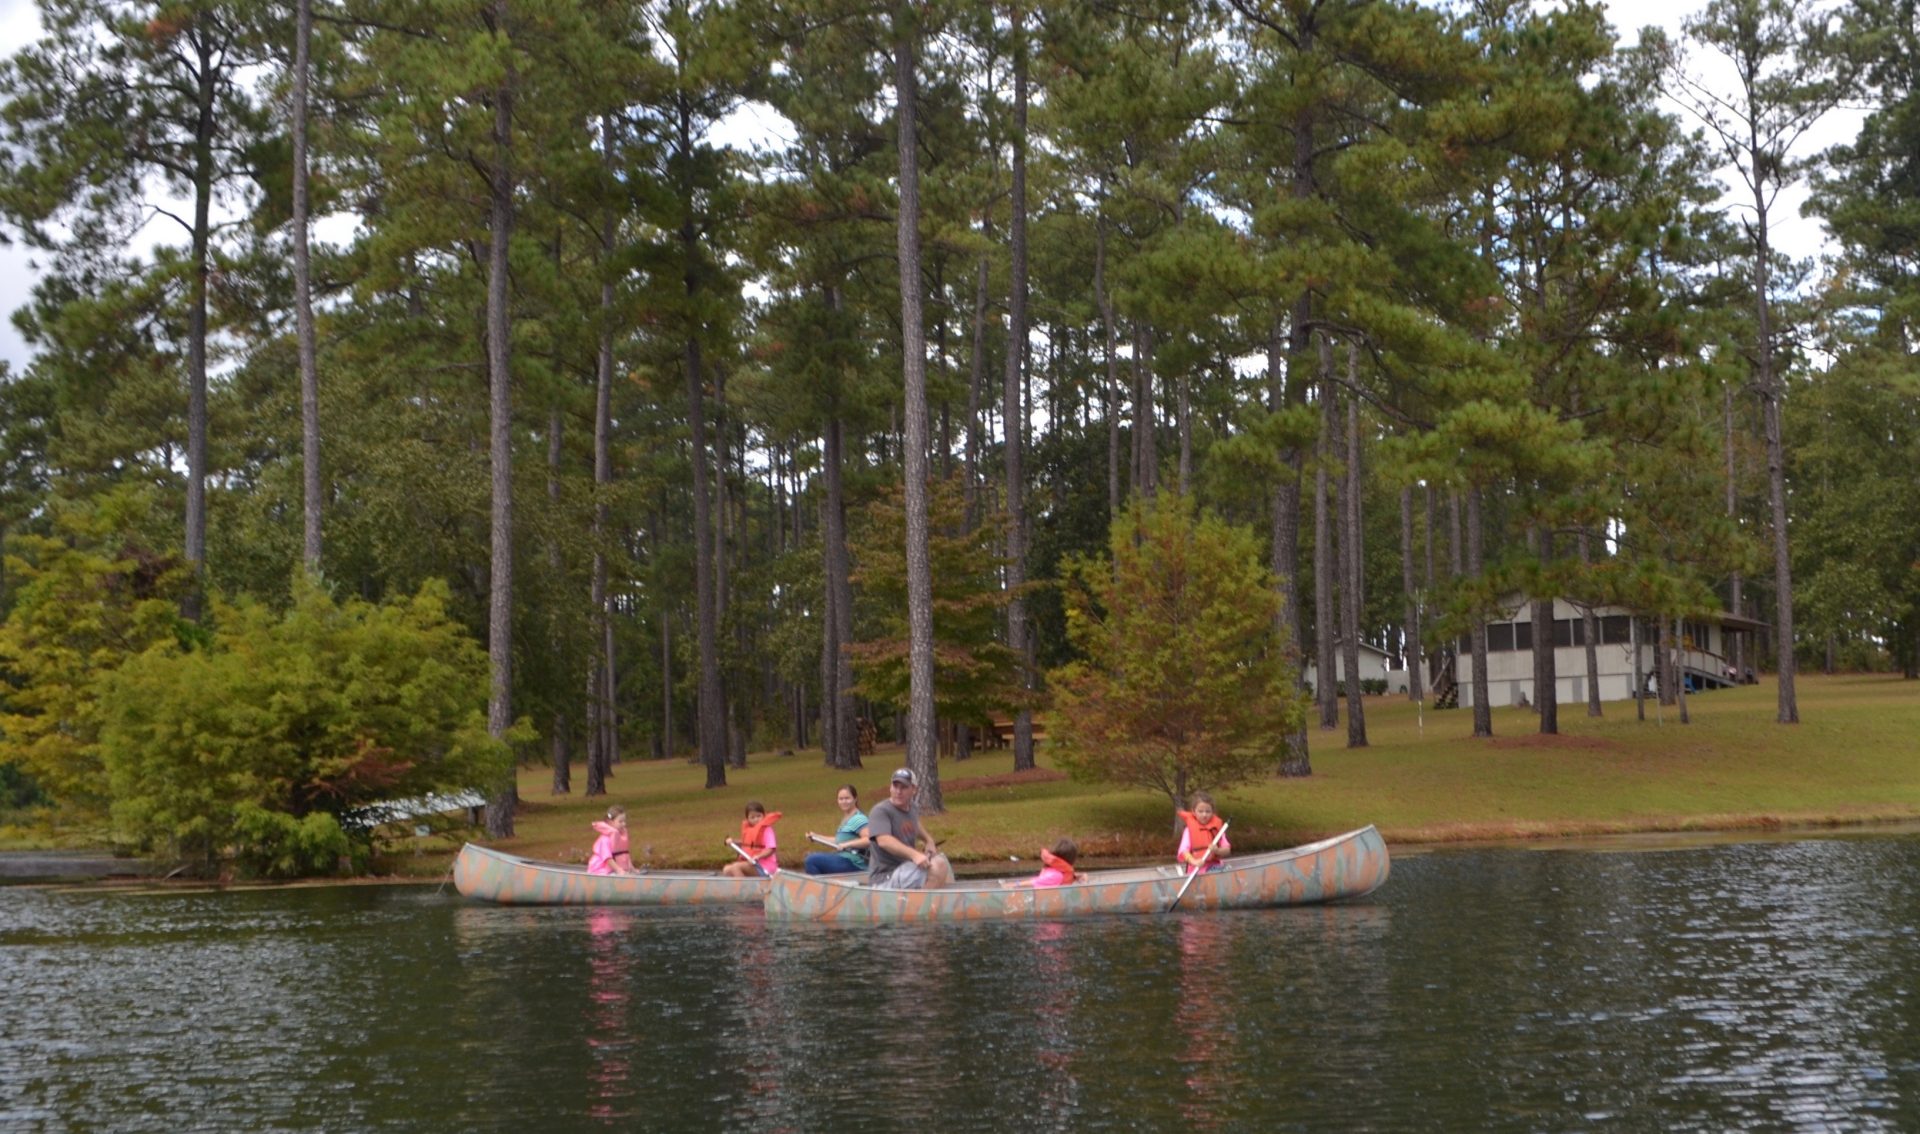 The girls of Daisy Troop #4890 enjoy a scenic canoe ride with Troop Leader Karl.